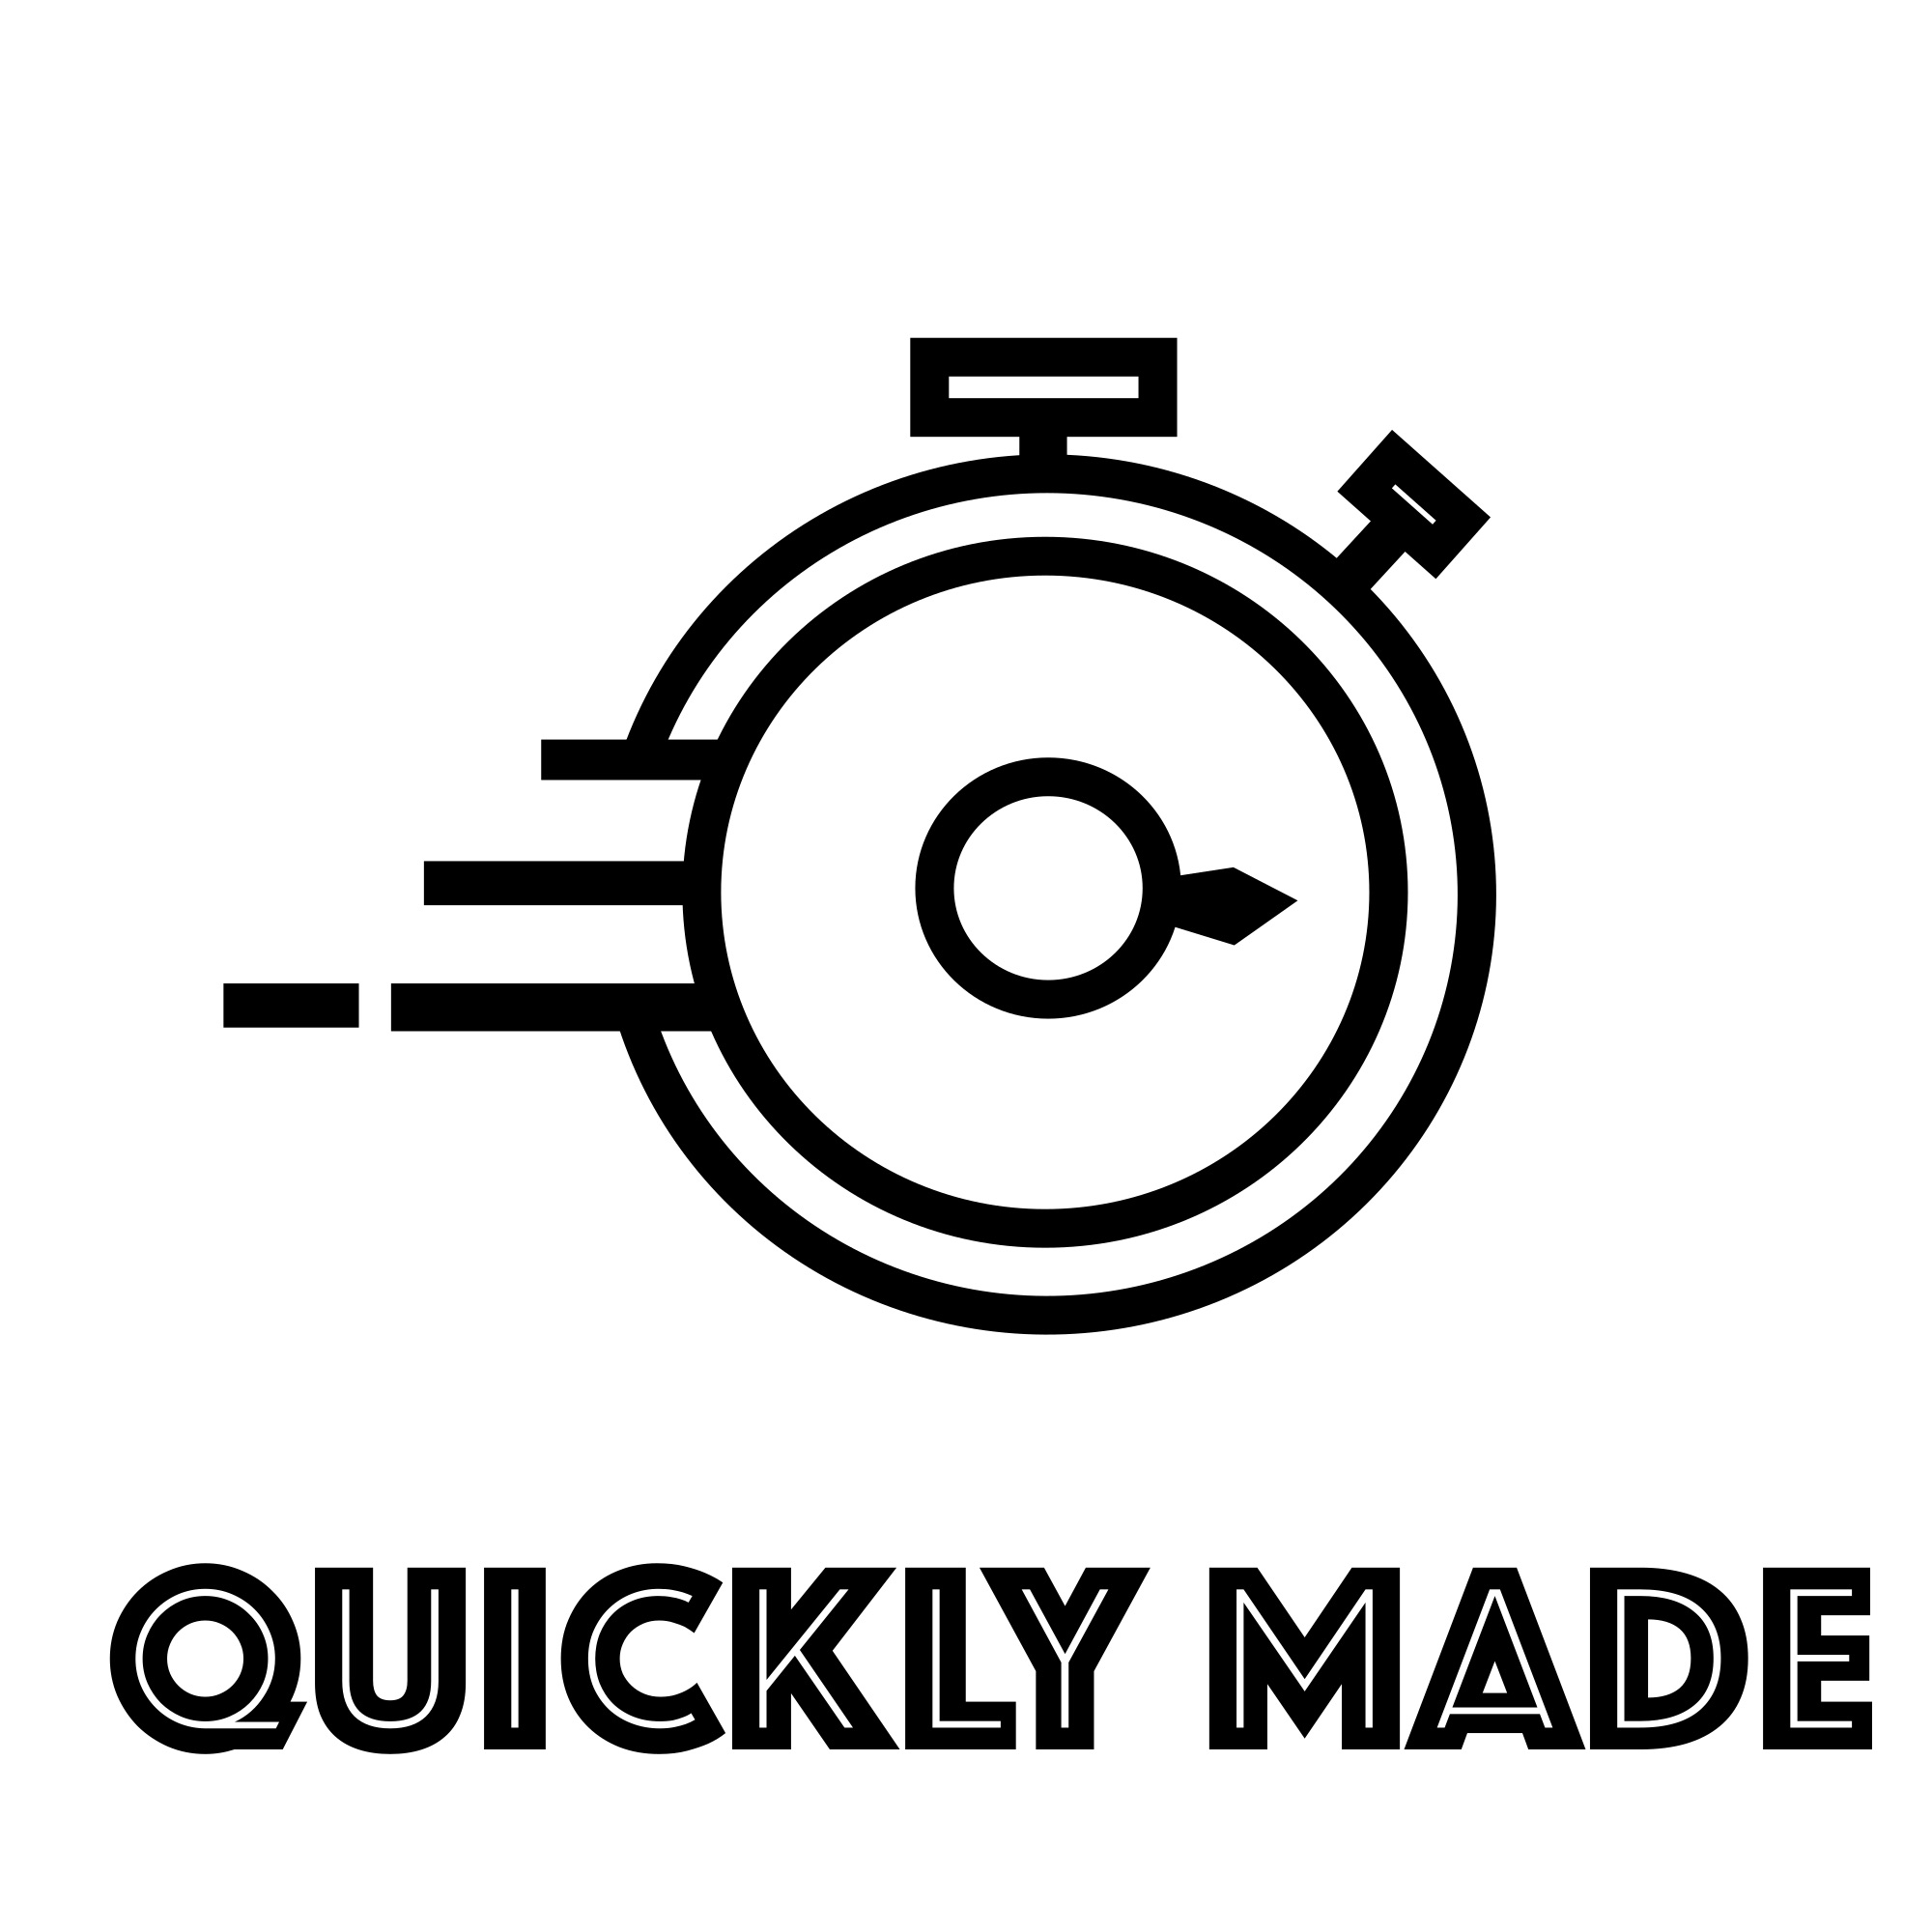 Quickly Made